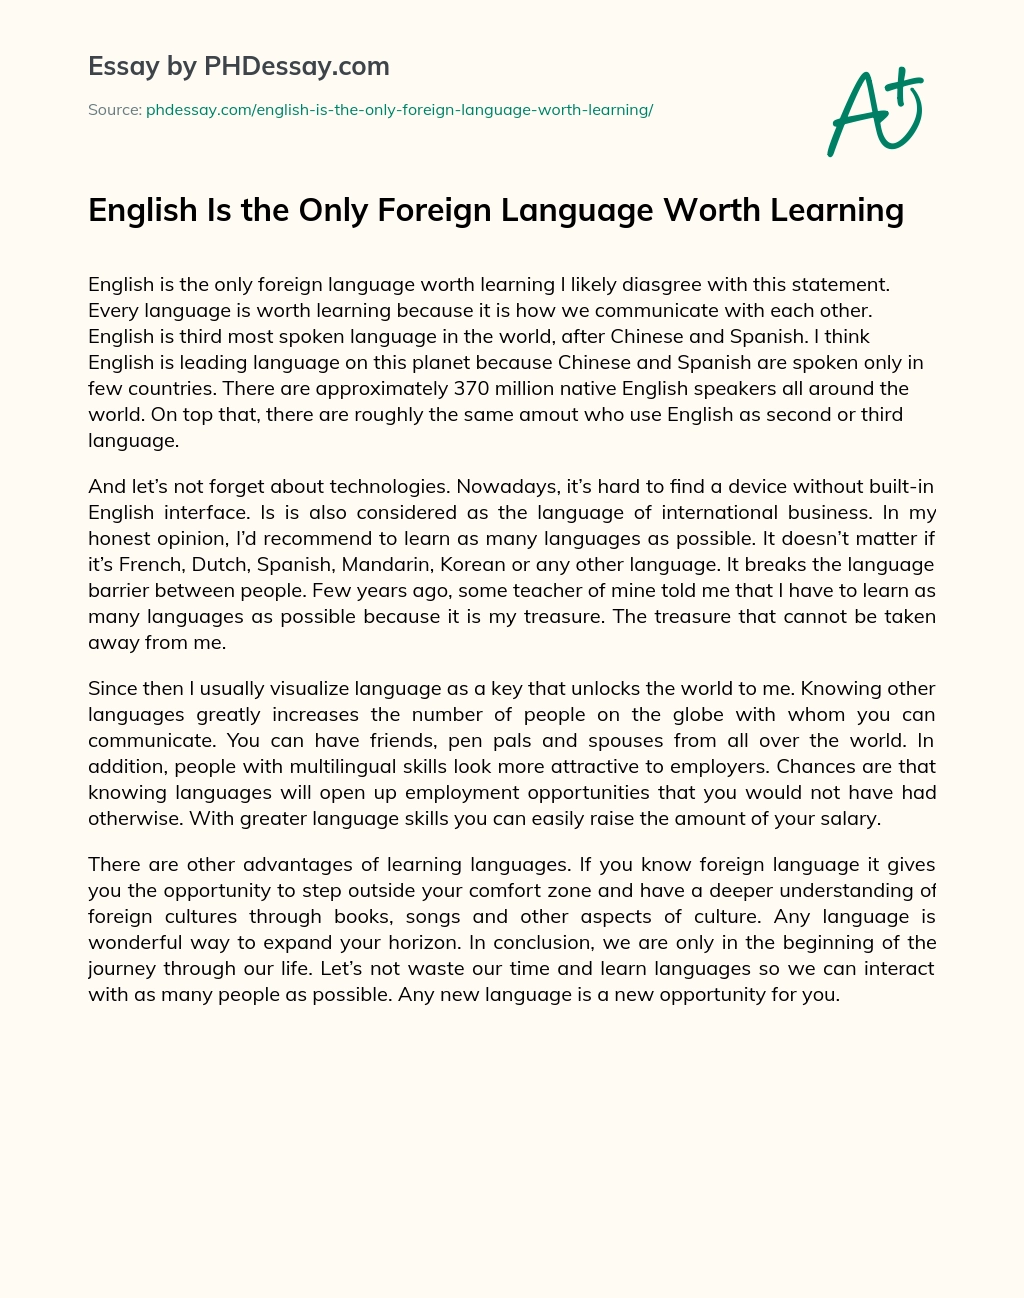 importance of learning foreign language essay